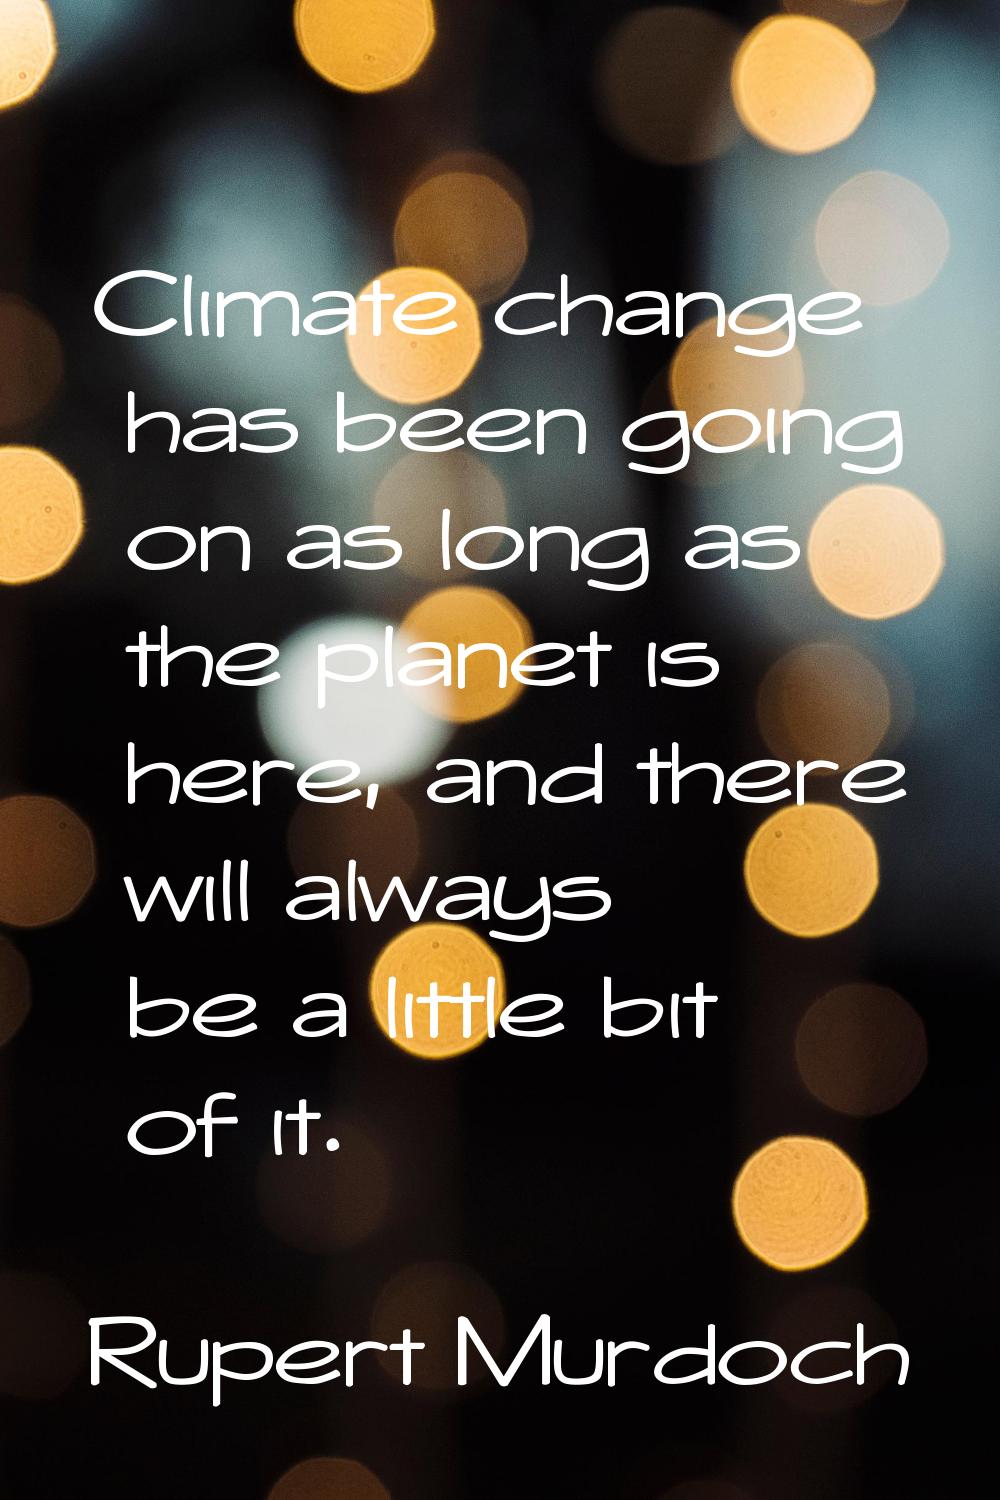 Climate change has been going on as long as the planet is here, and there will always be a little b